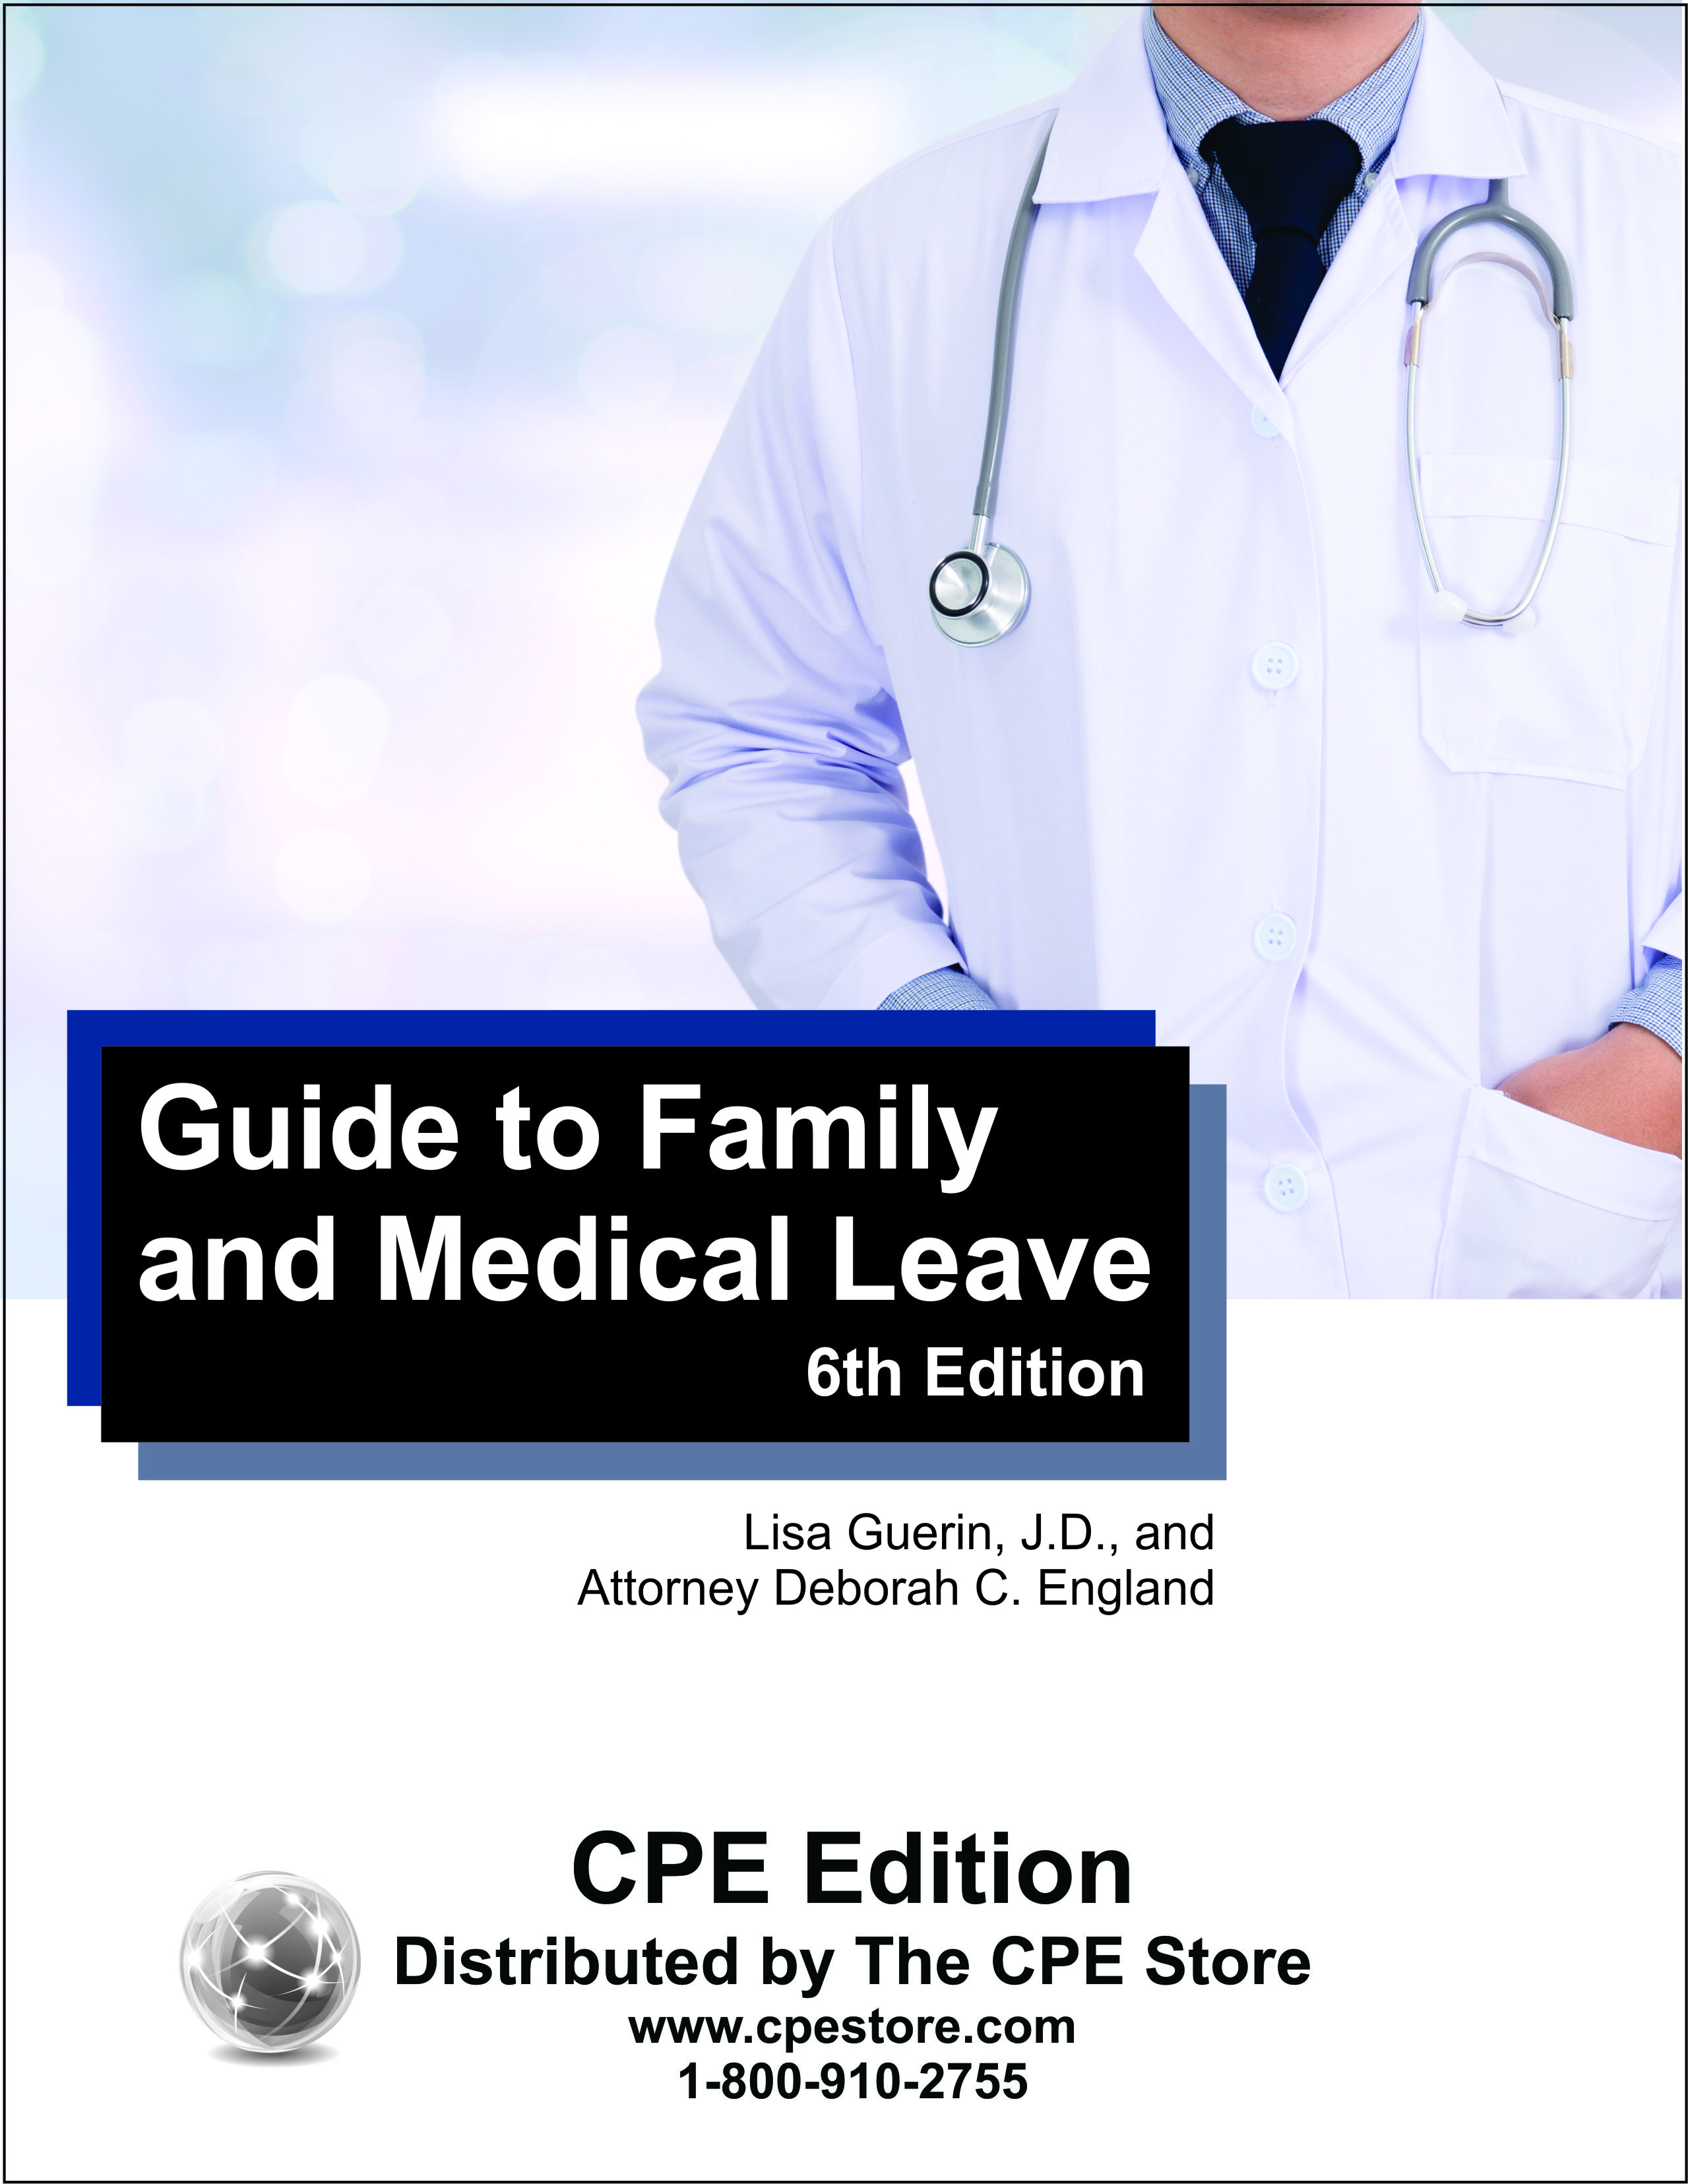 Guide to Family and Medical Leave